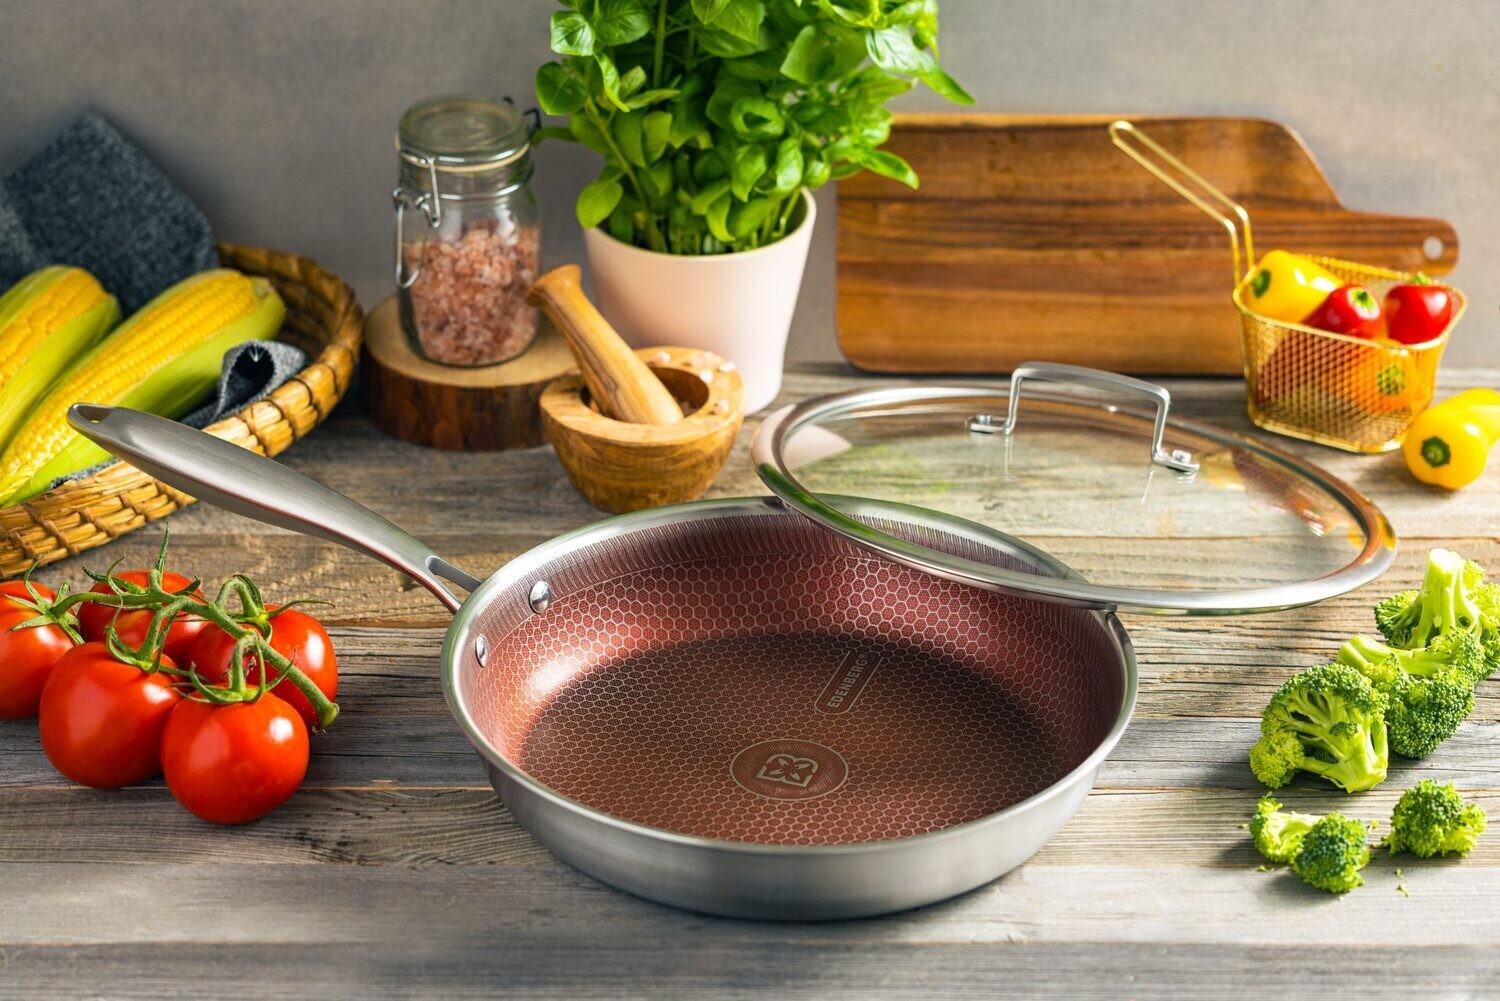 Edenberg Deep Fry Pan 26m Tri-Ply Stainless Steel induction friendly Cookware EB-14155 SUS-304/SUS430